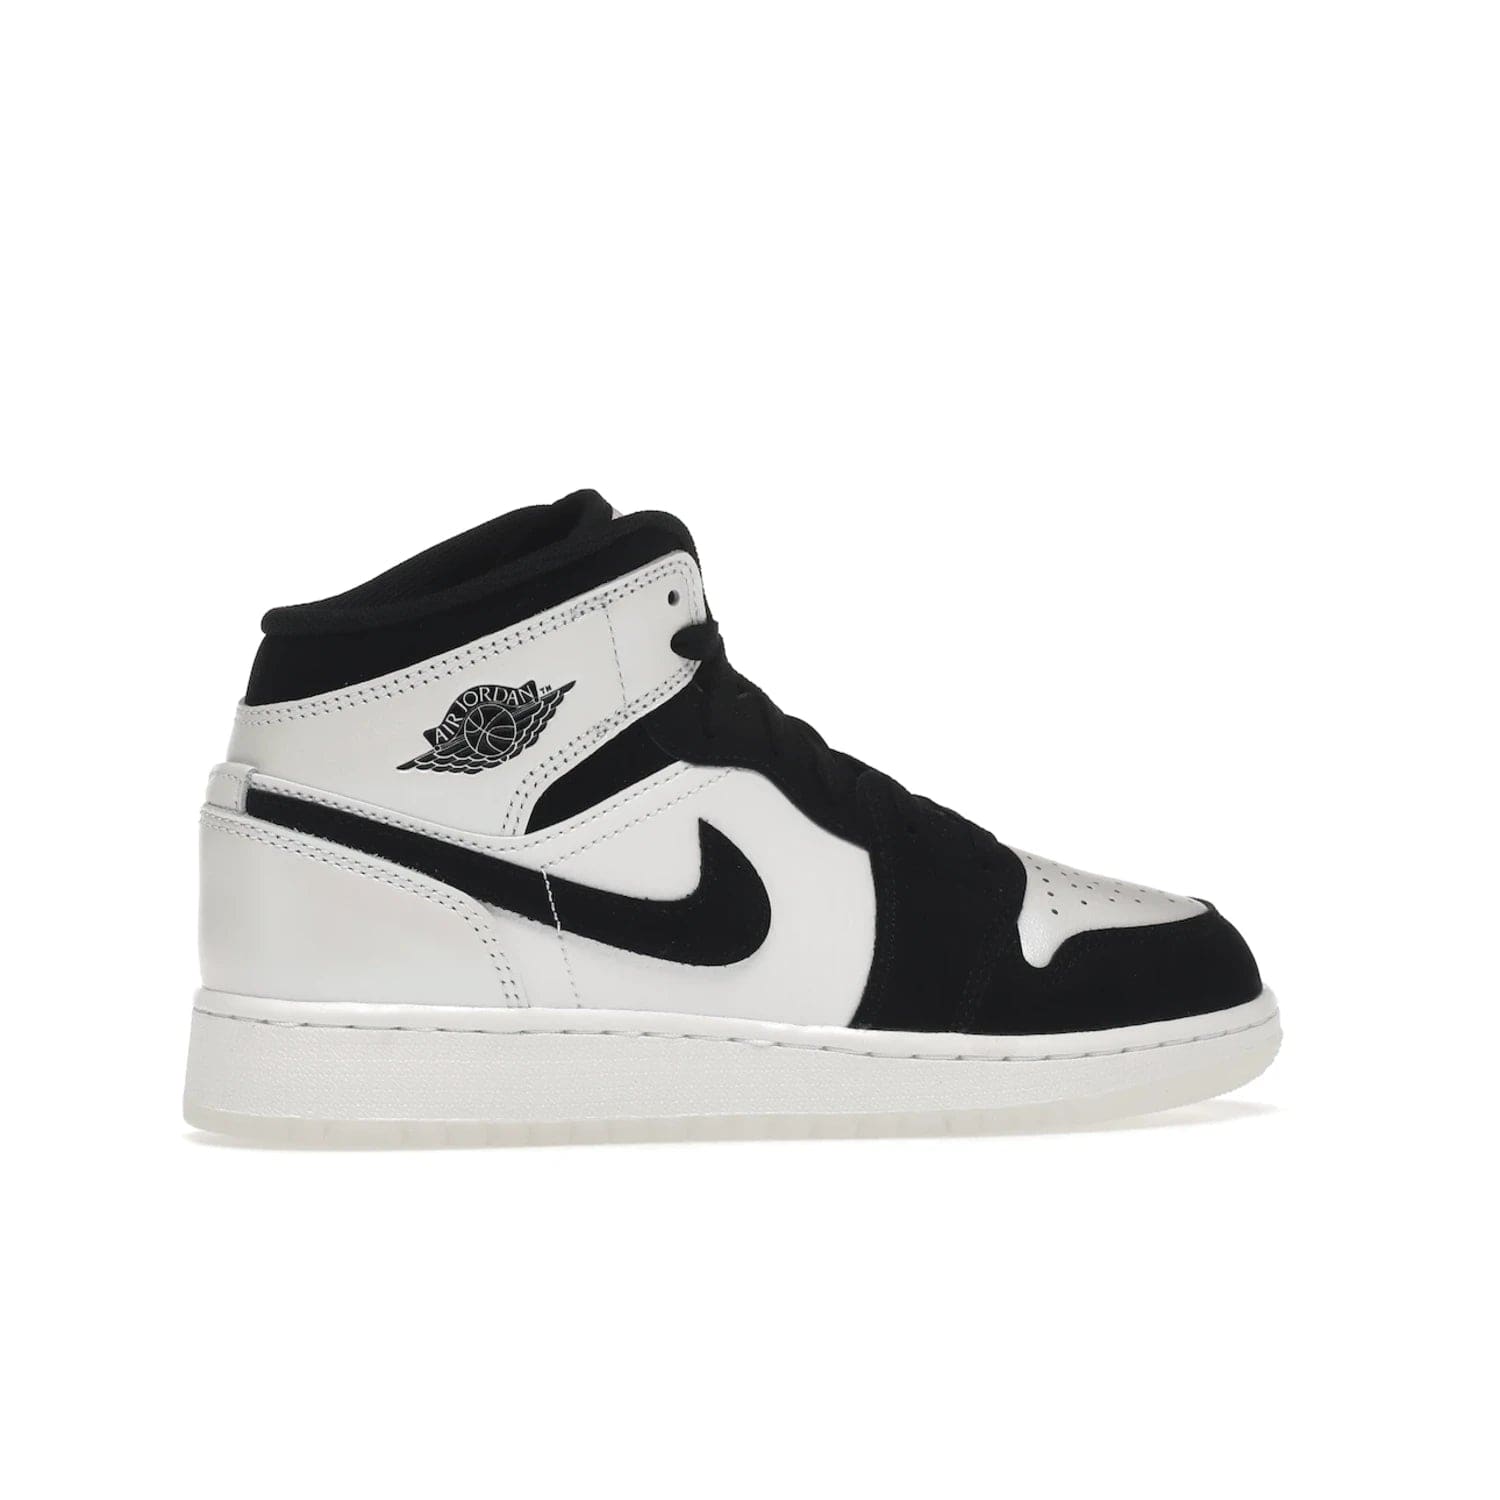 Jordan 1 Mid Diamond Shorts (GS) - Image 35 - Only at www.BallersClubKickz.com - Get the Jordan 1 Mid Diamond Shorts GS on 9th Feb 2022! Features a white, black & suede design with nylon tongue, stamped wings logo, rubber midsole & outsole. Only $100!